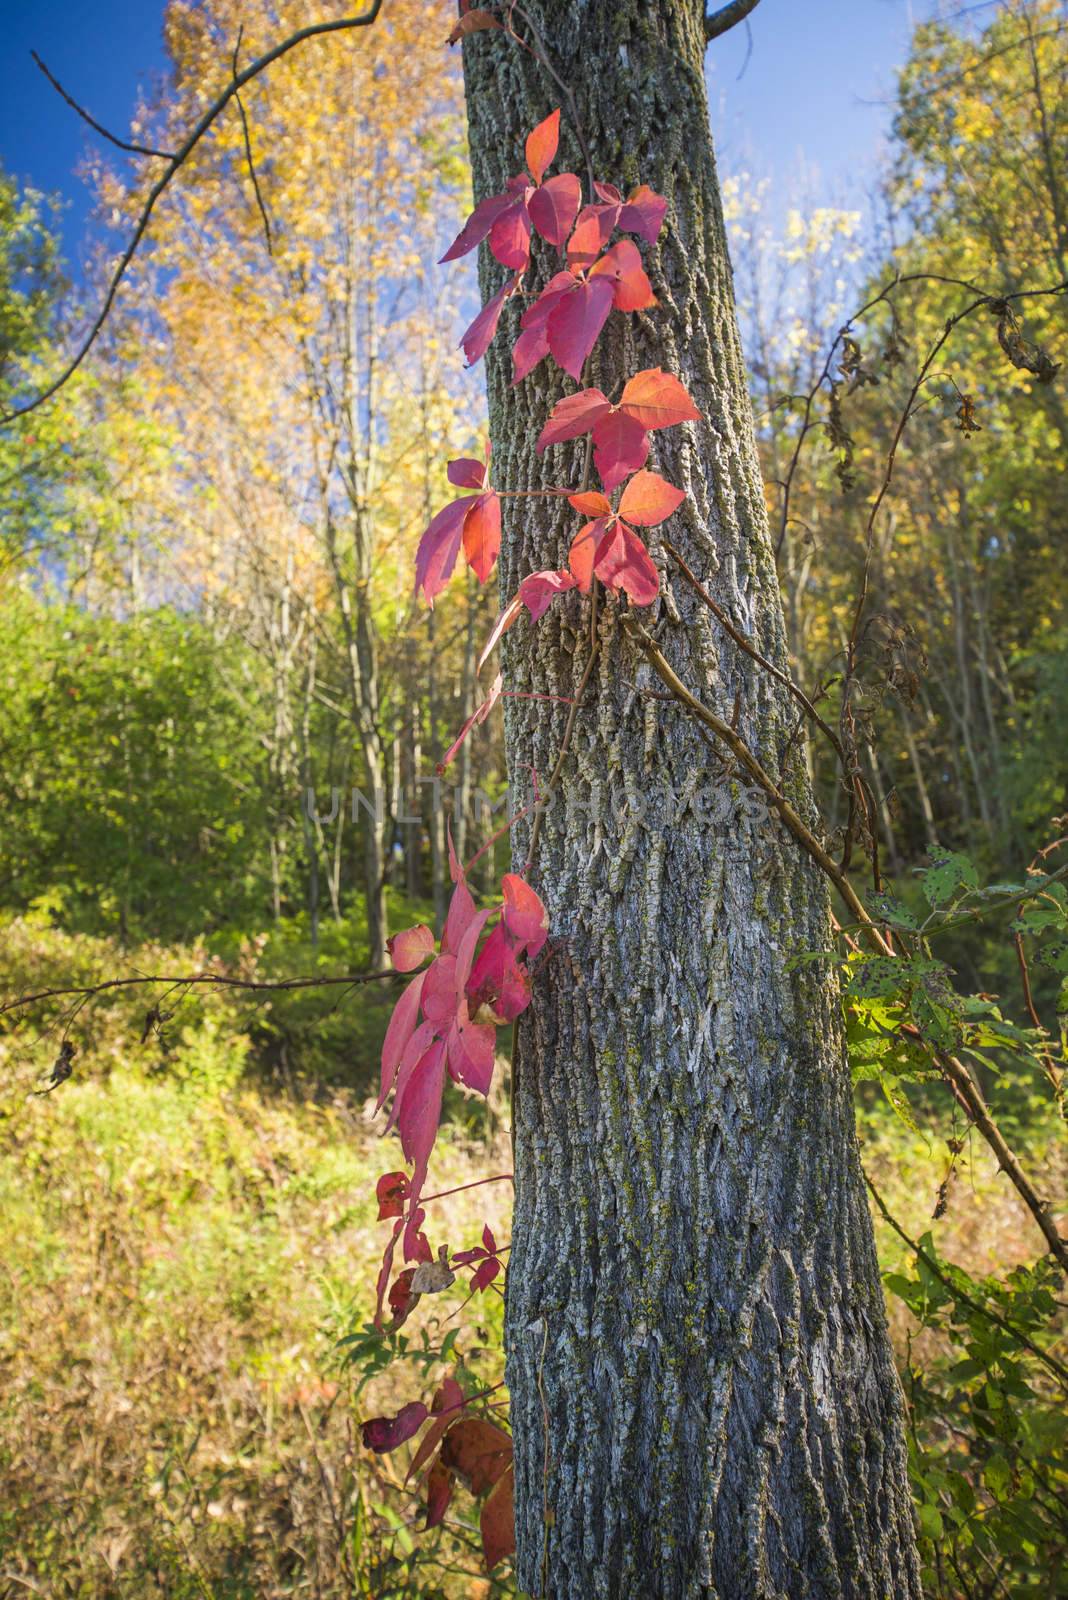 Colorful fall view with trunk and red vine plant against blue sky, Dundas conservation area, Ontario, Canada.